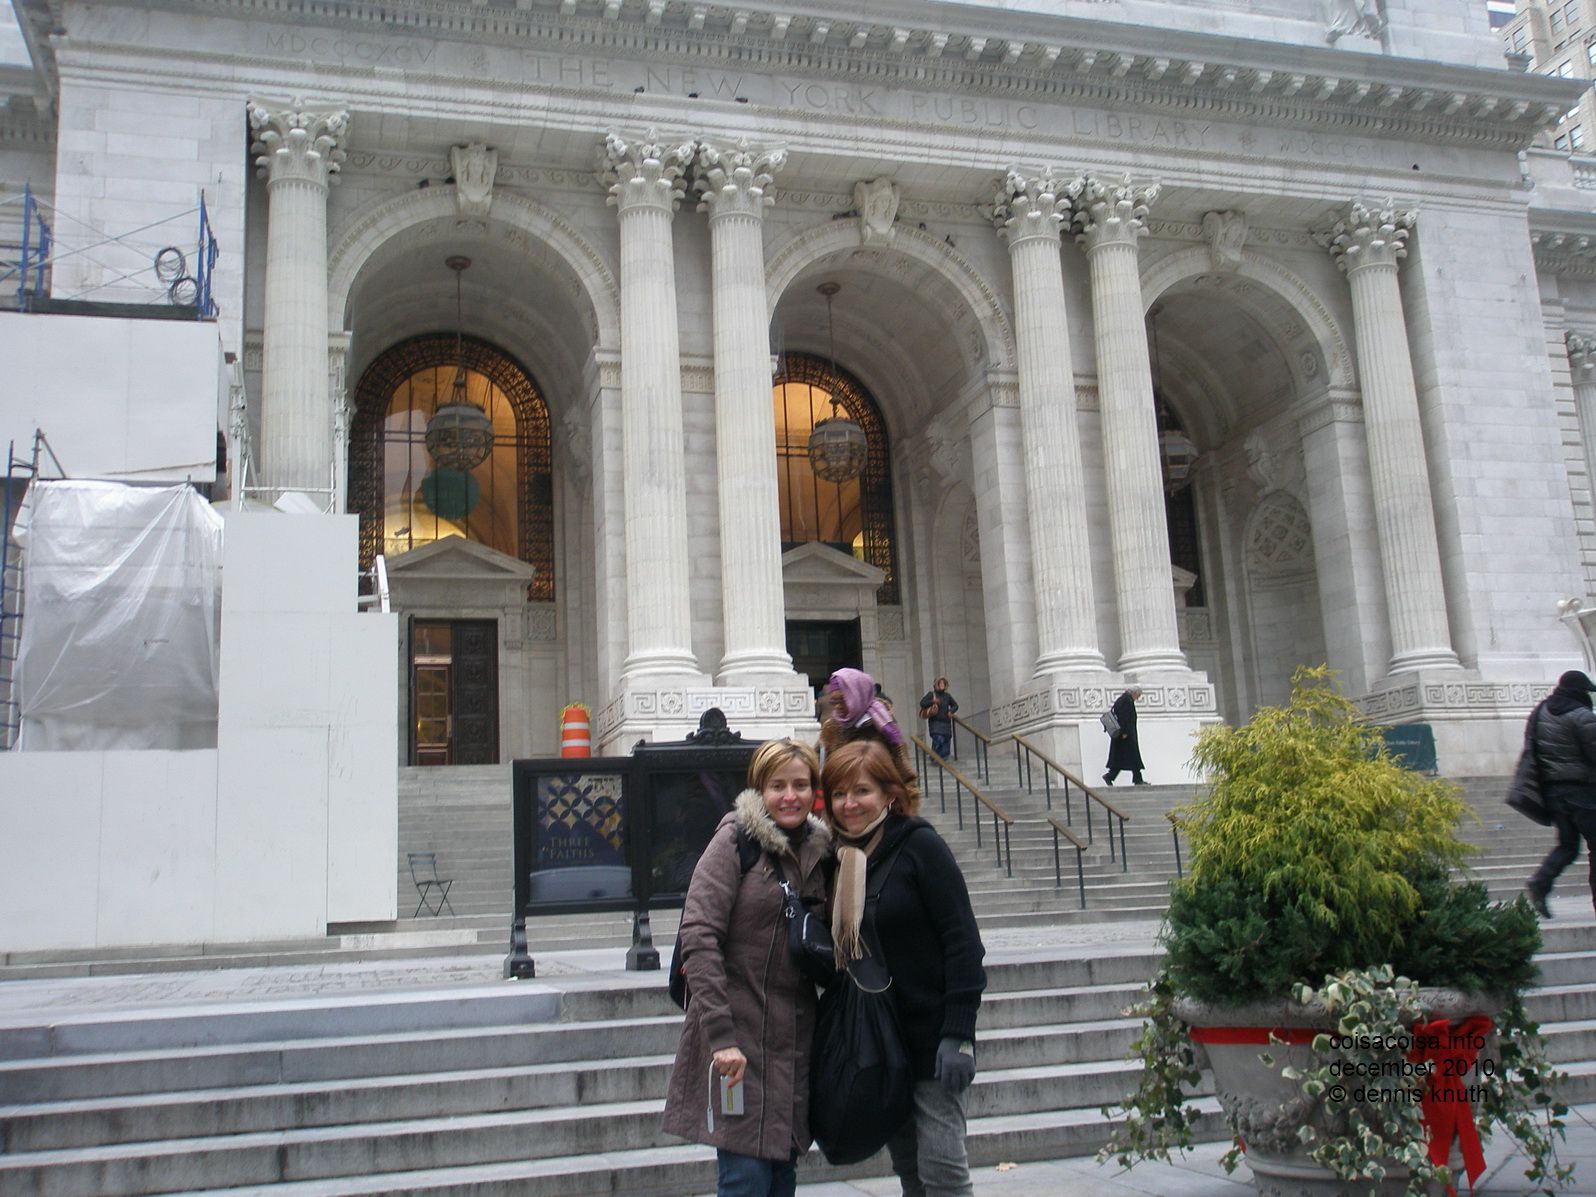 Lisete and Concinha in front of the New York Public Library